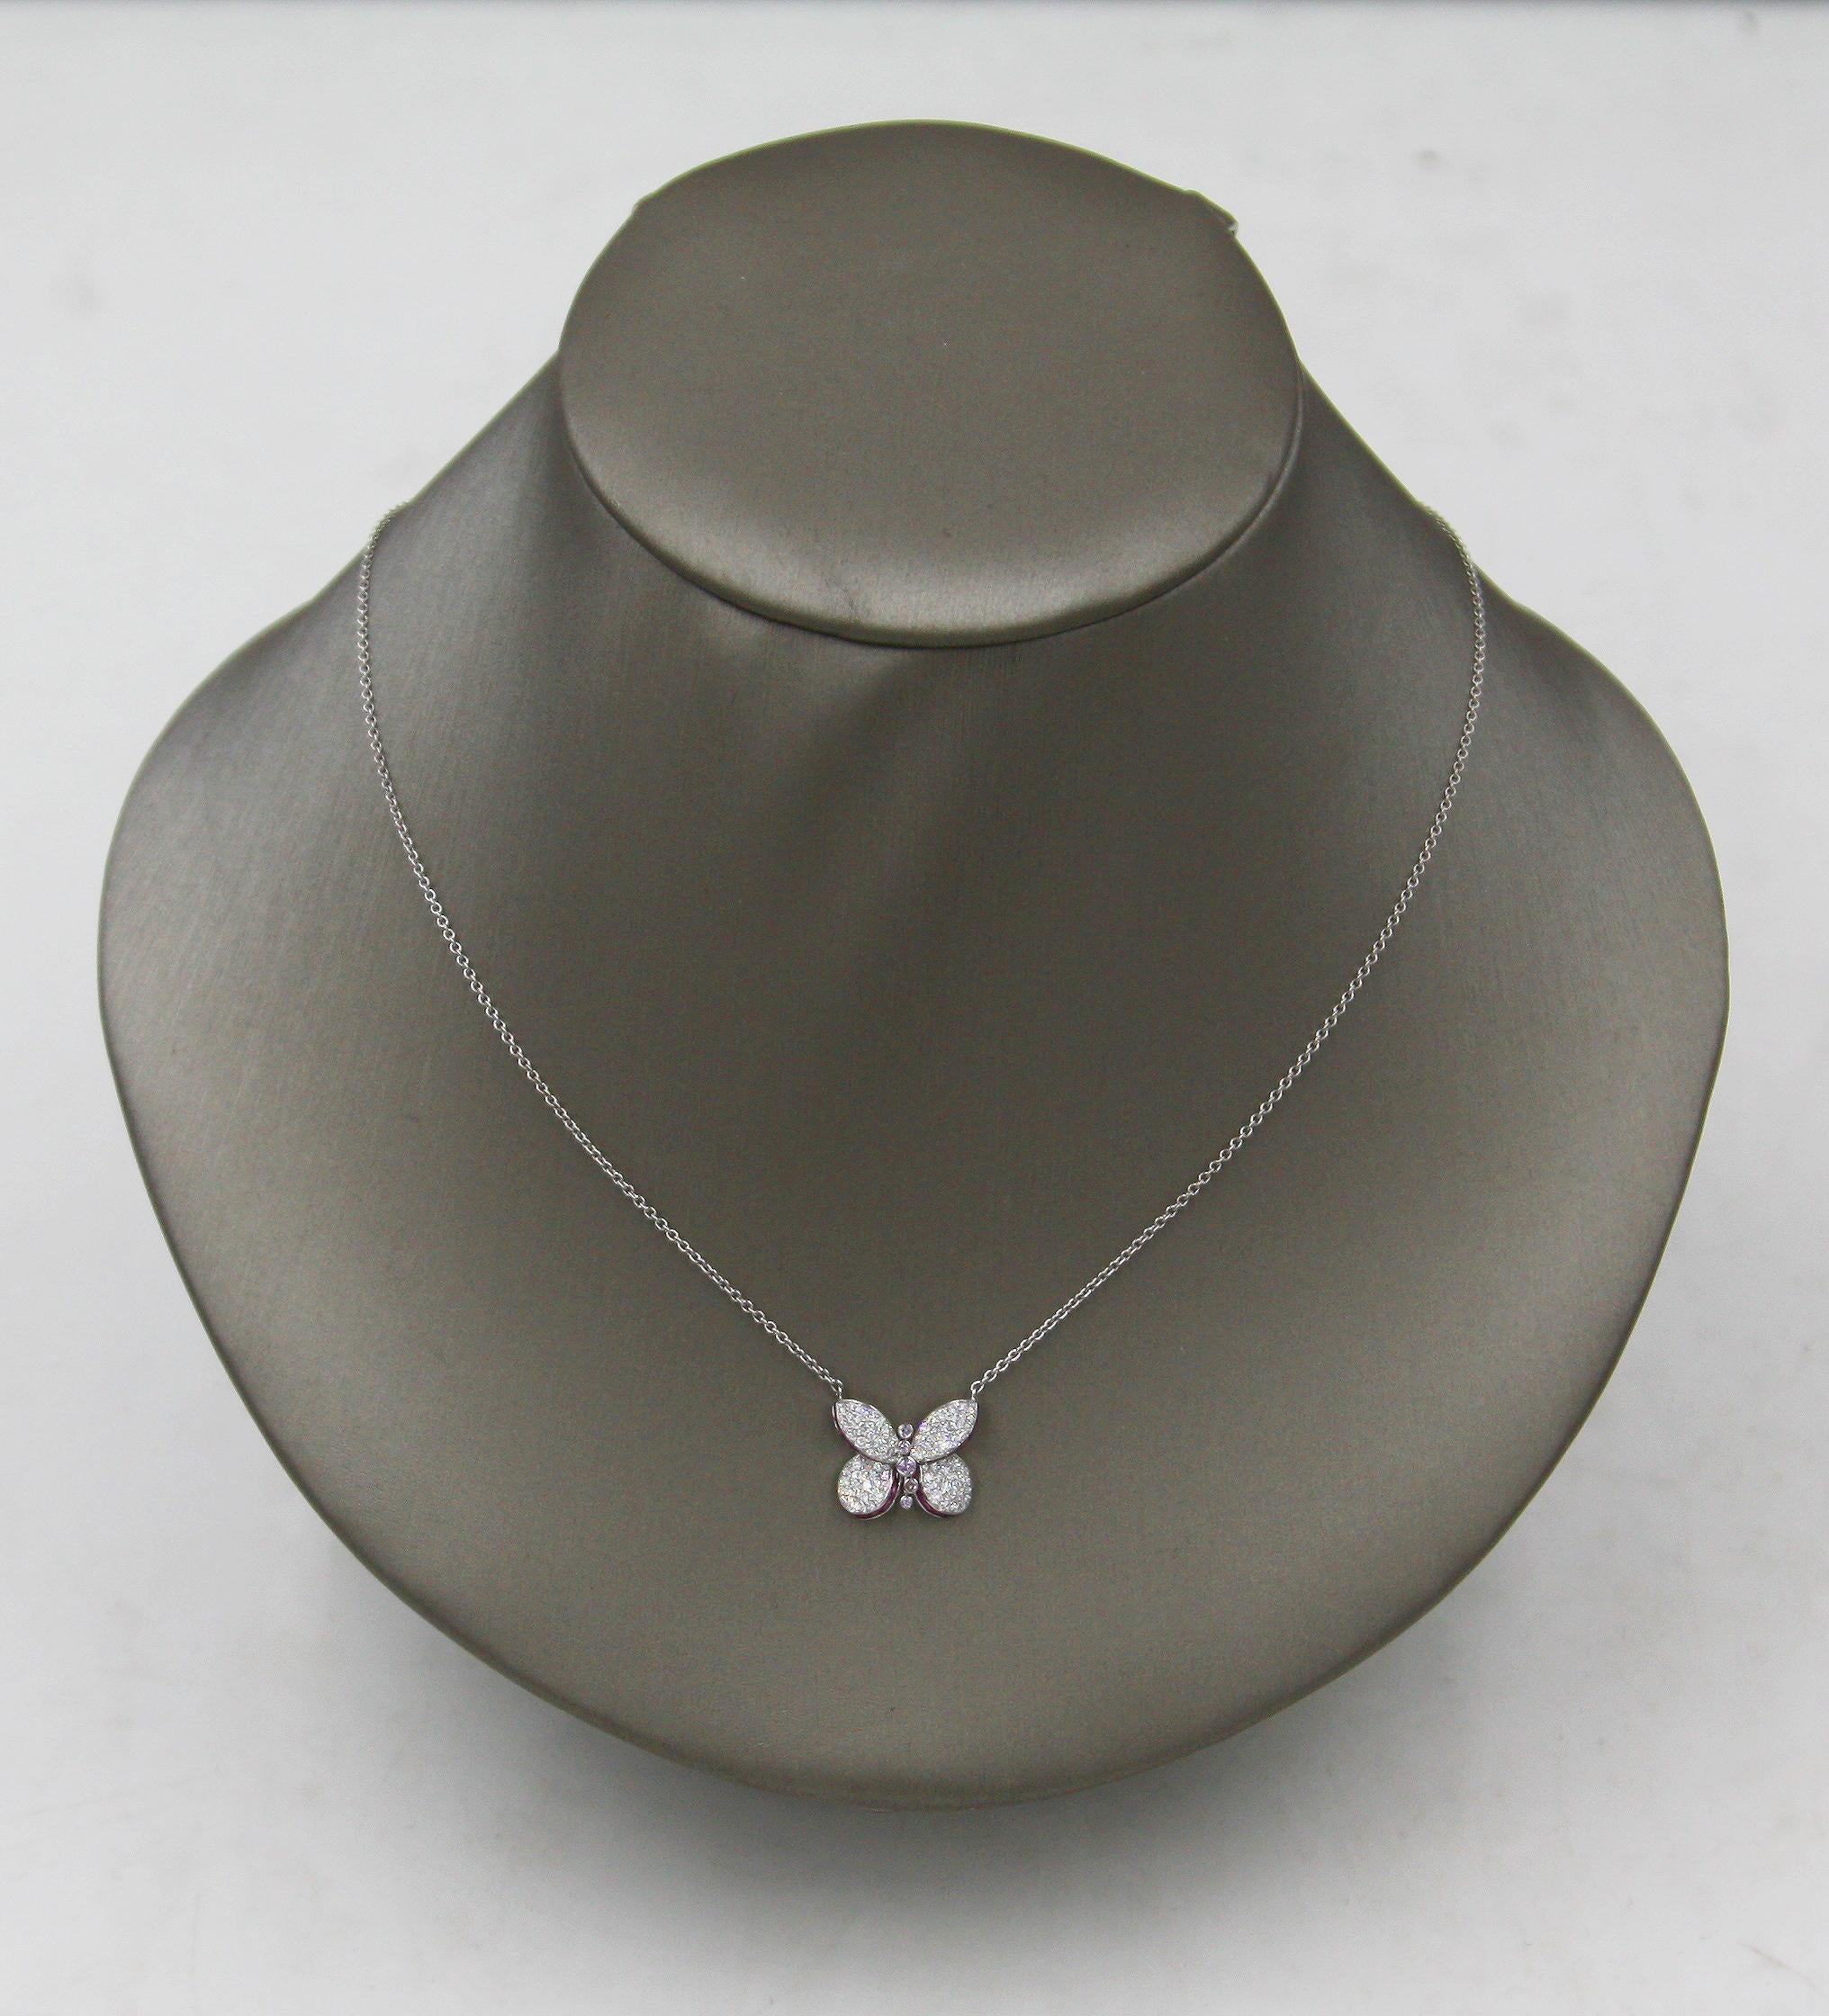 graff necklace butterfly